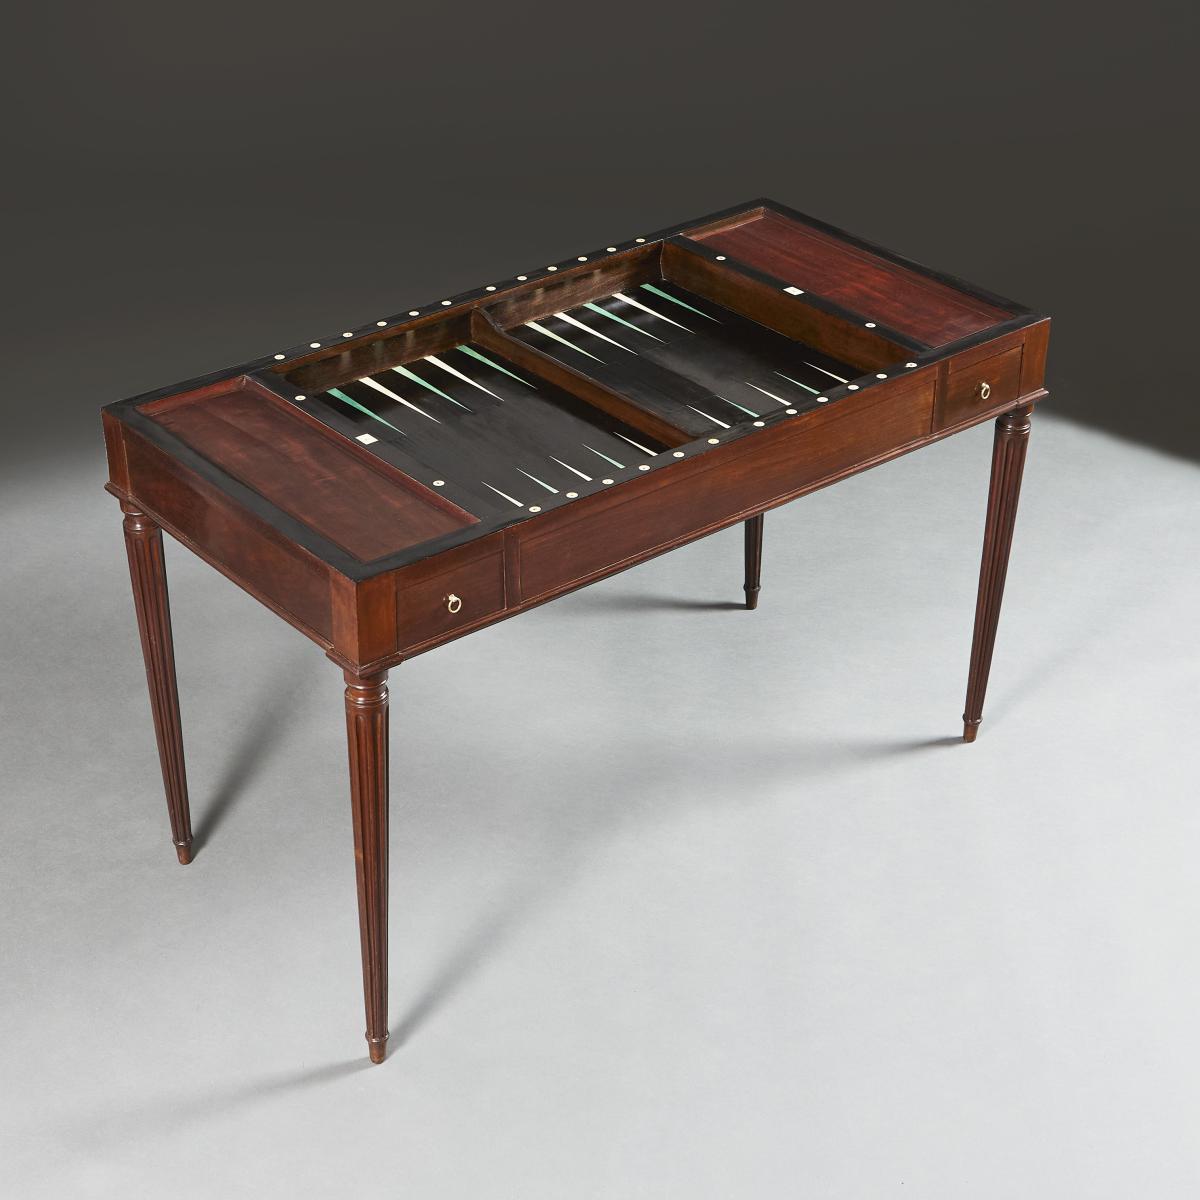 A Fine Early 19th Century Tric Trac Table